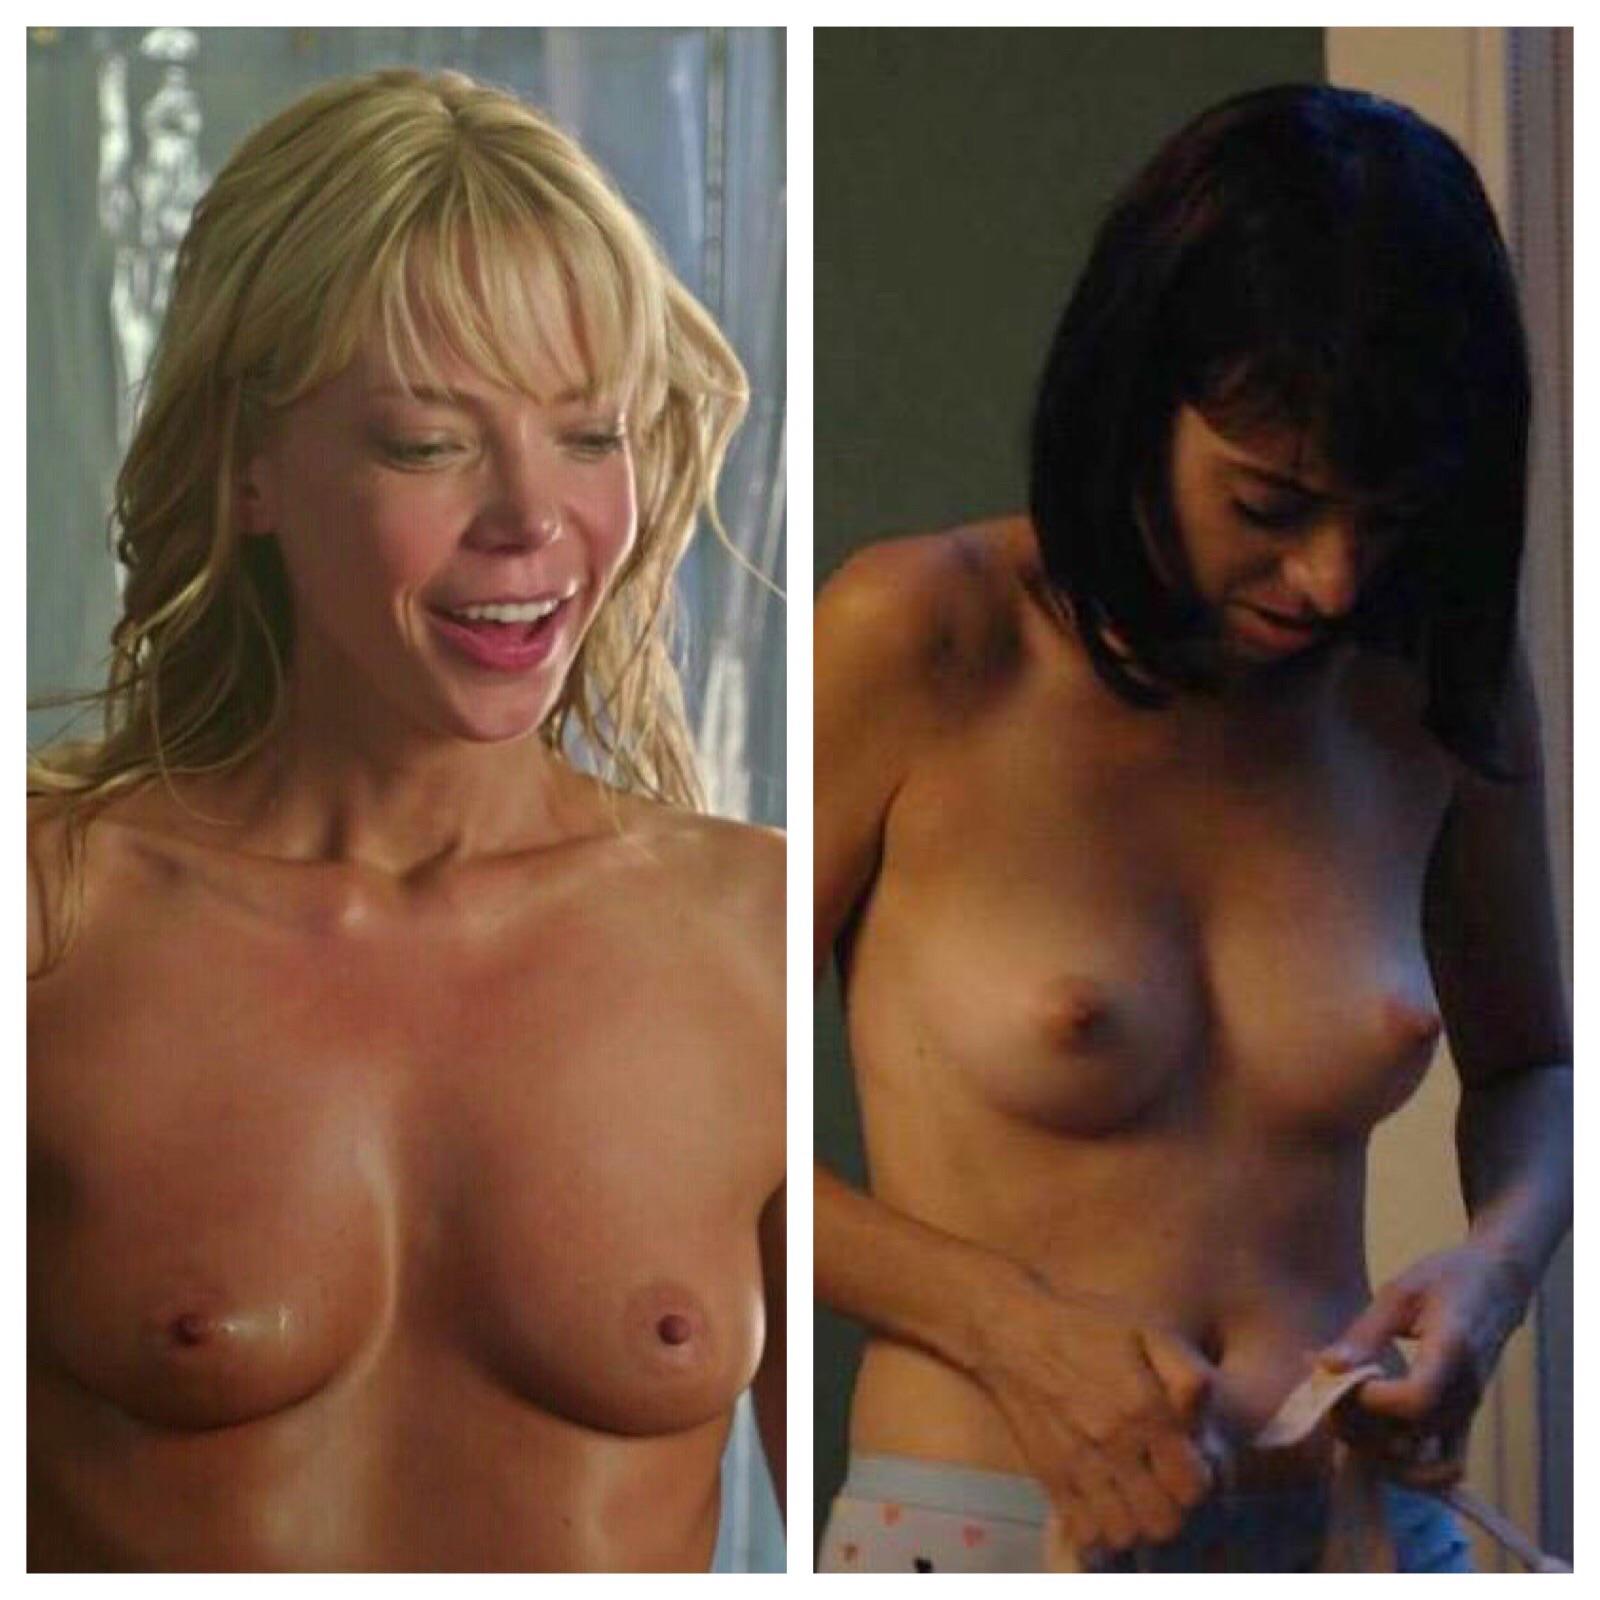 april weddle reccomend garfunkel and oates porn pic